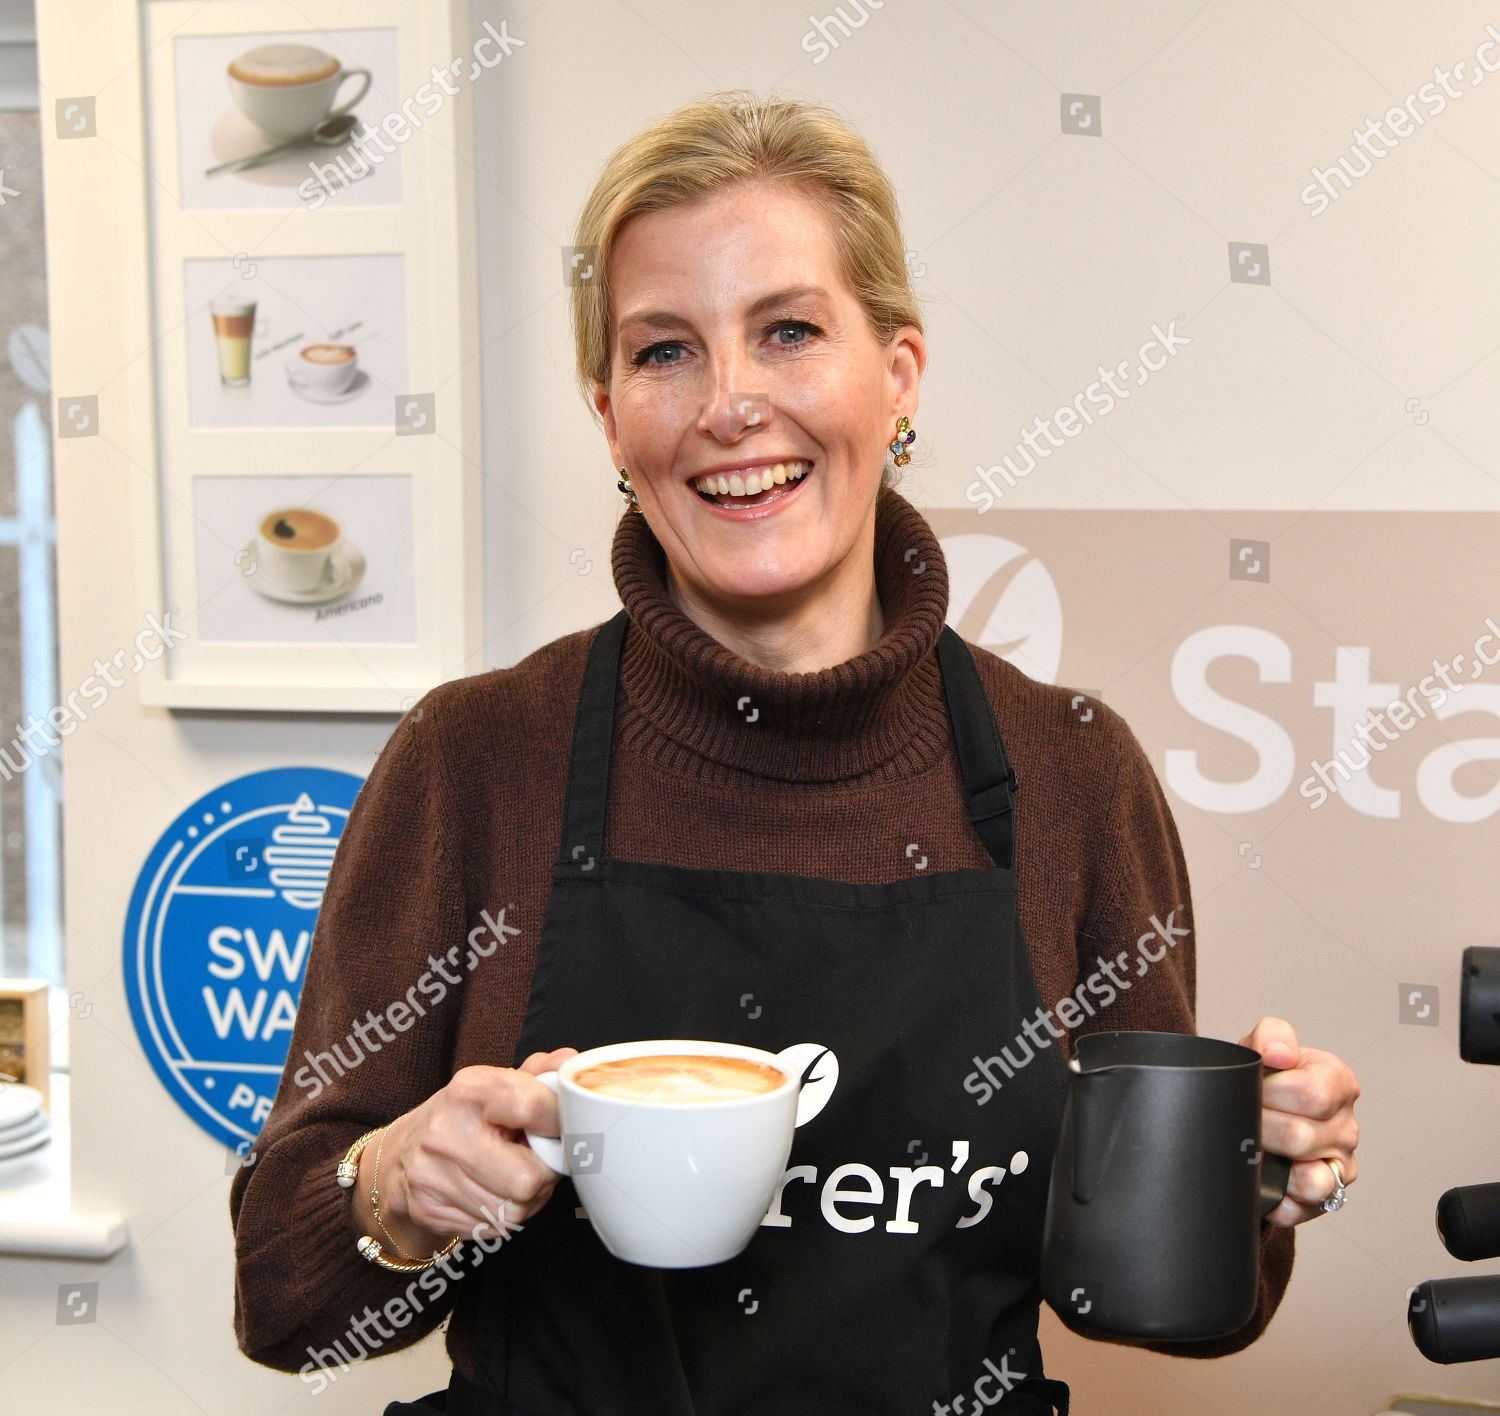 sophie-countess-of-wessex-visit-to-cumbria-shutterstock-editorial-10095439ao.jpg